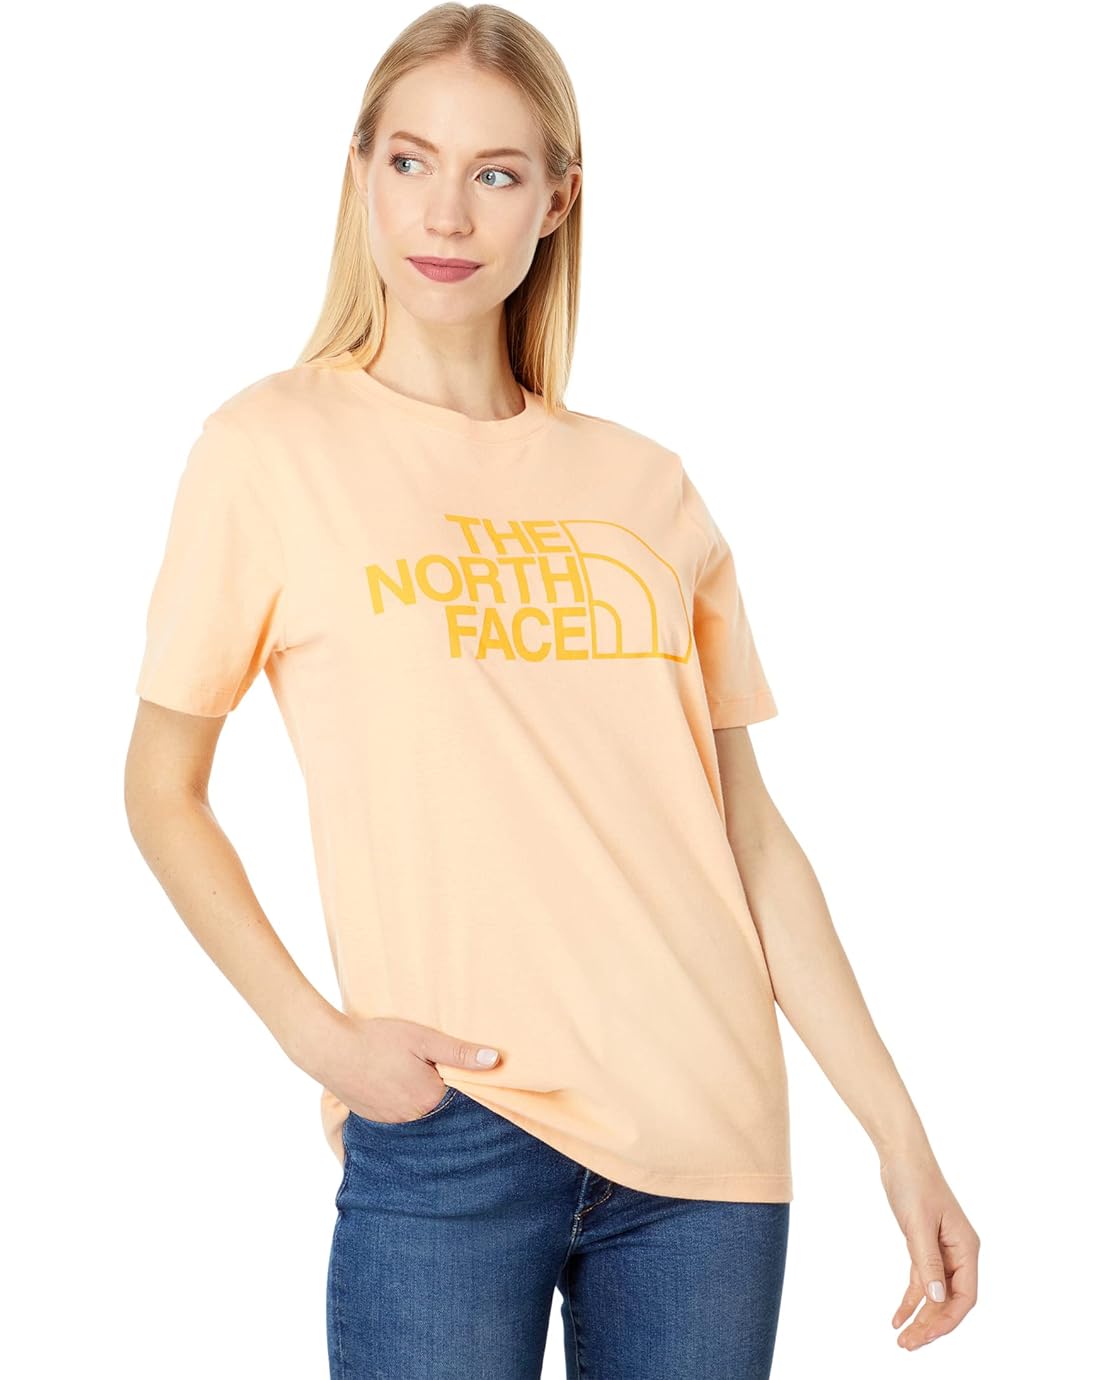 The North Face Half Dome Cotton Short Sleeve Tee